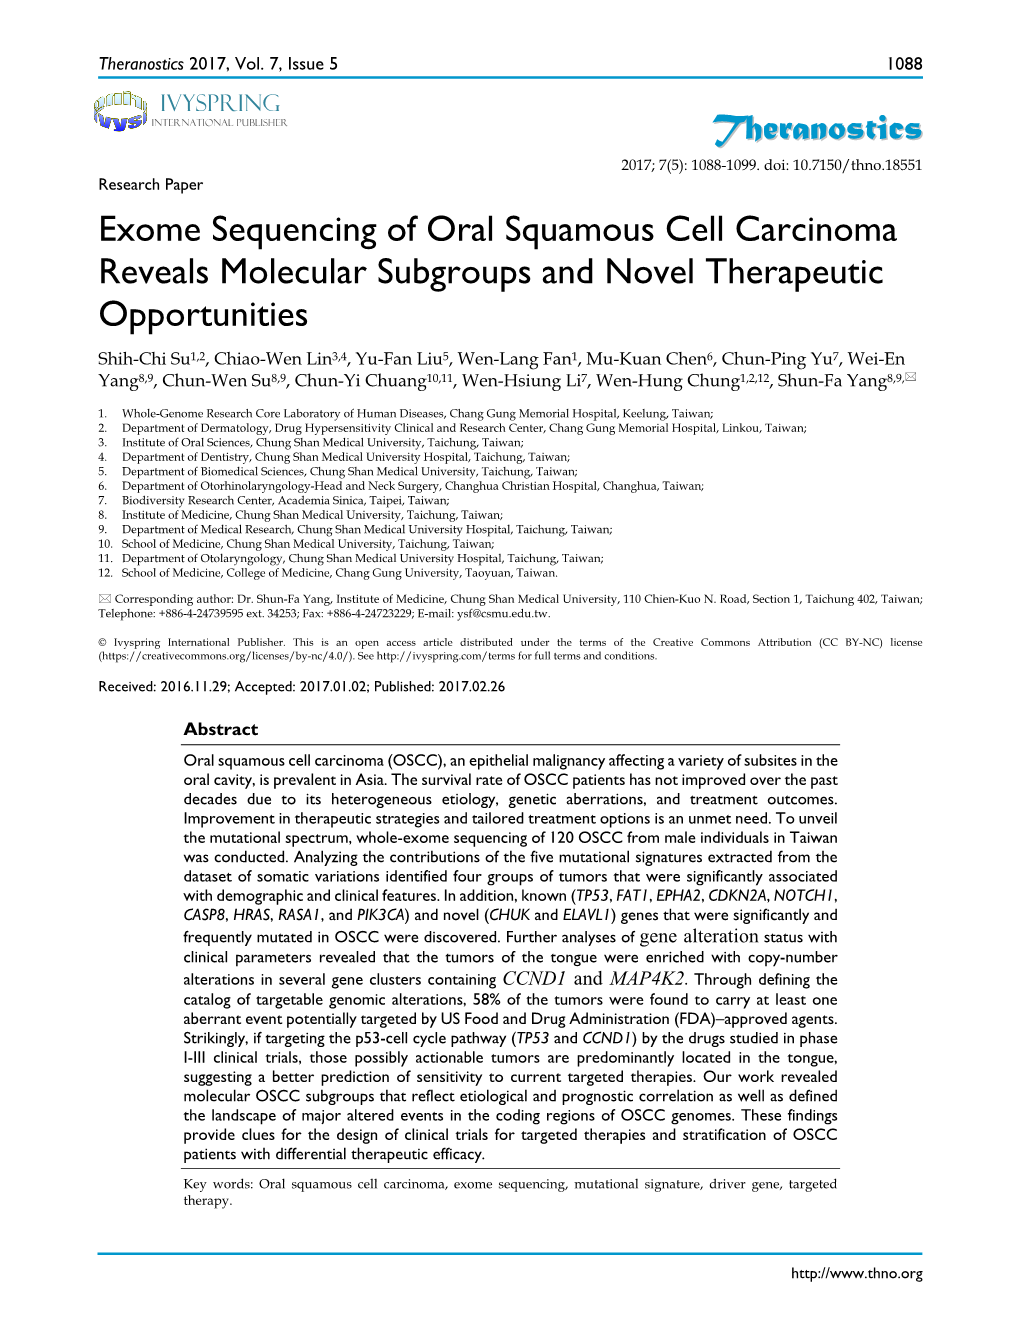 Theranostics Exome Sequencing of Oral Squamous Cell Carcinoma